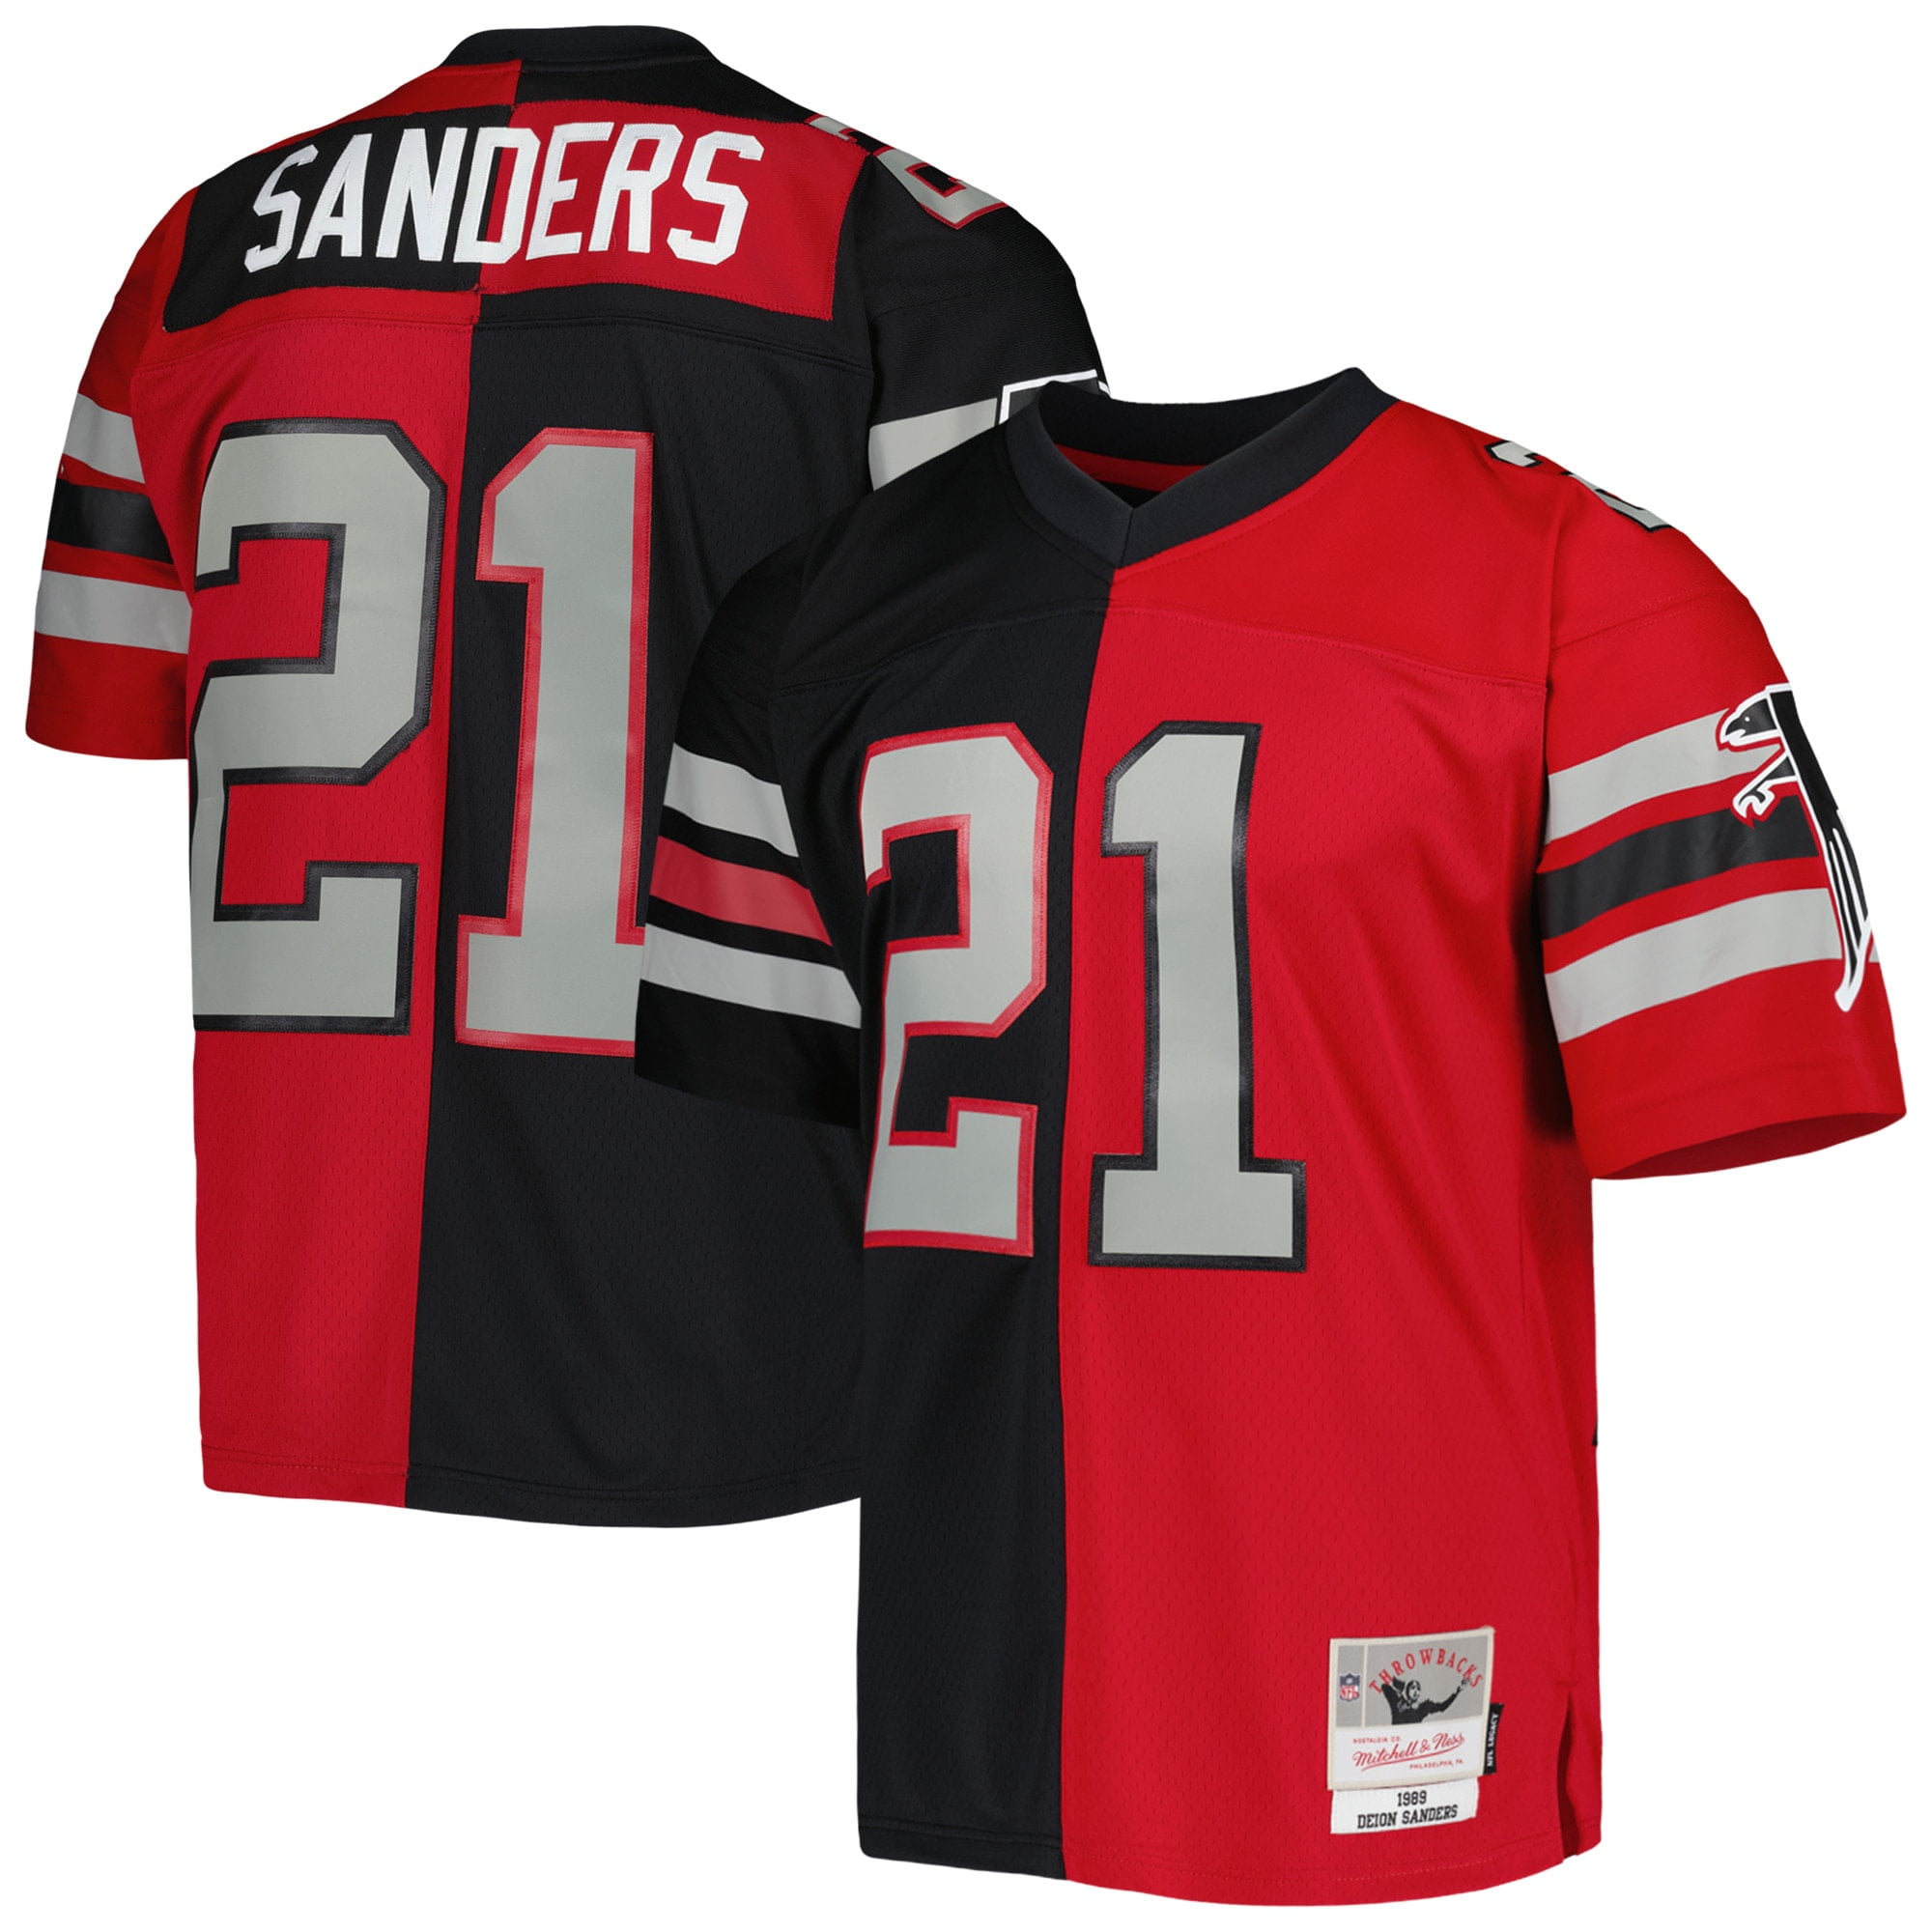 Deion Sanders Atlanta Falcons Autographed Mitchell & Ness Red